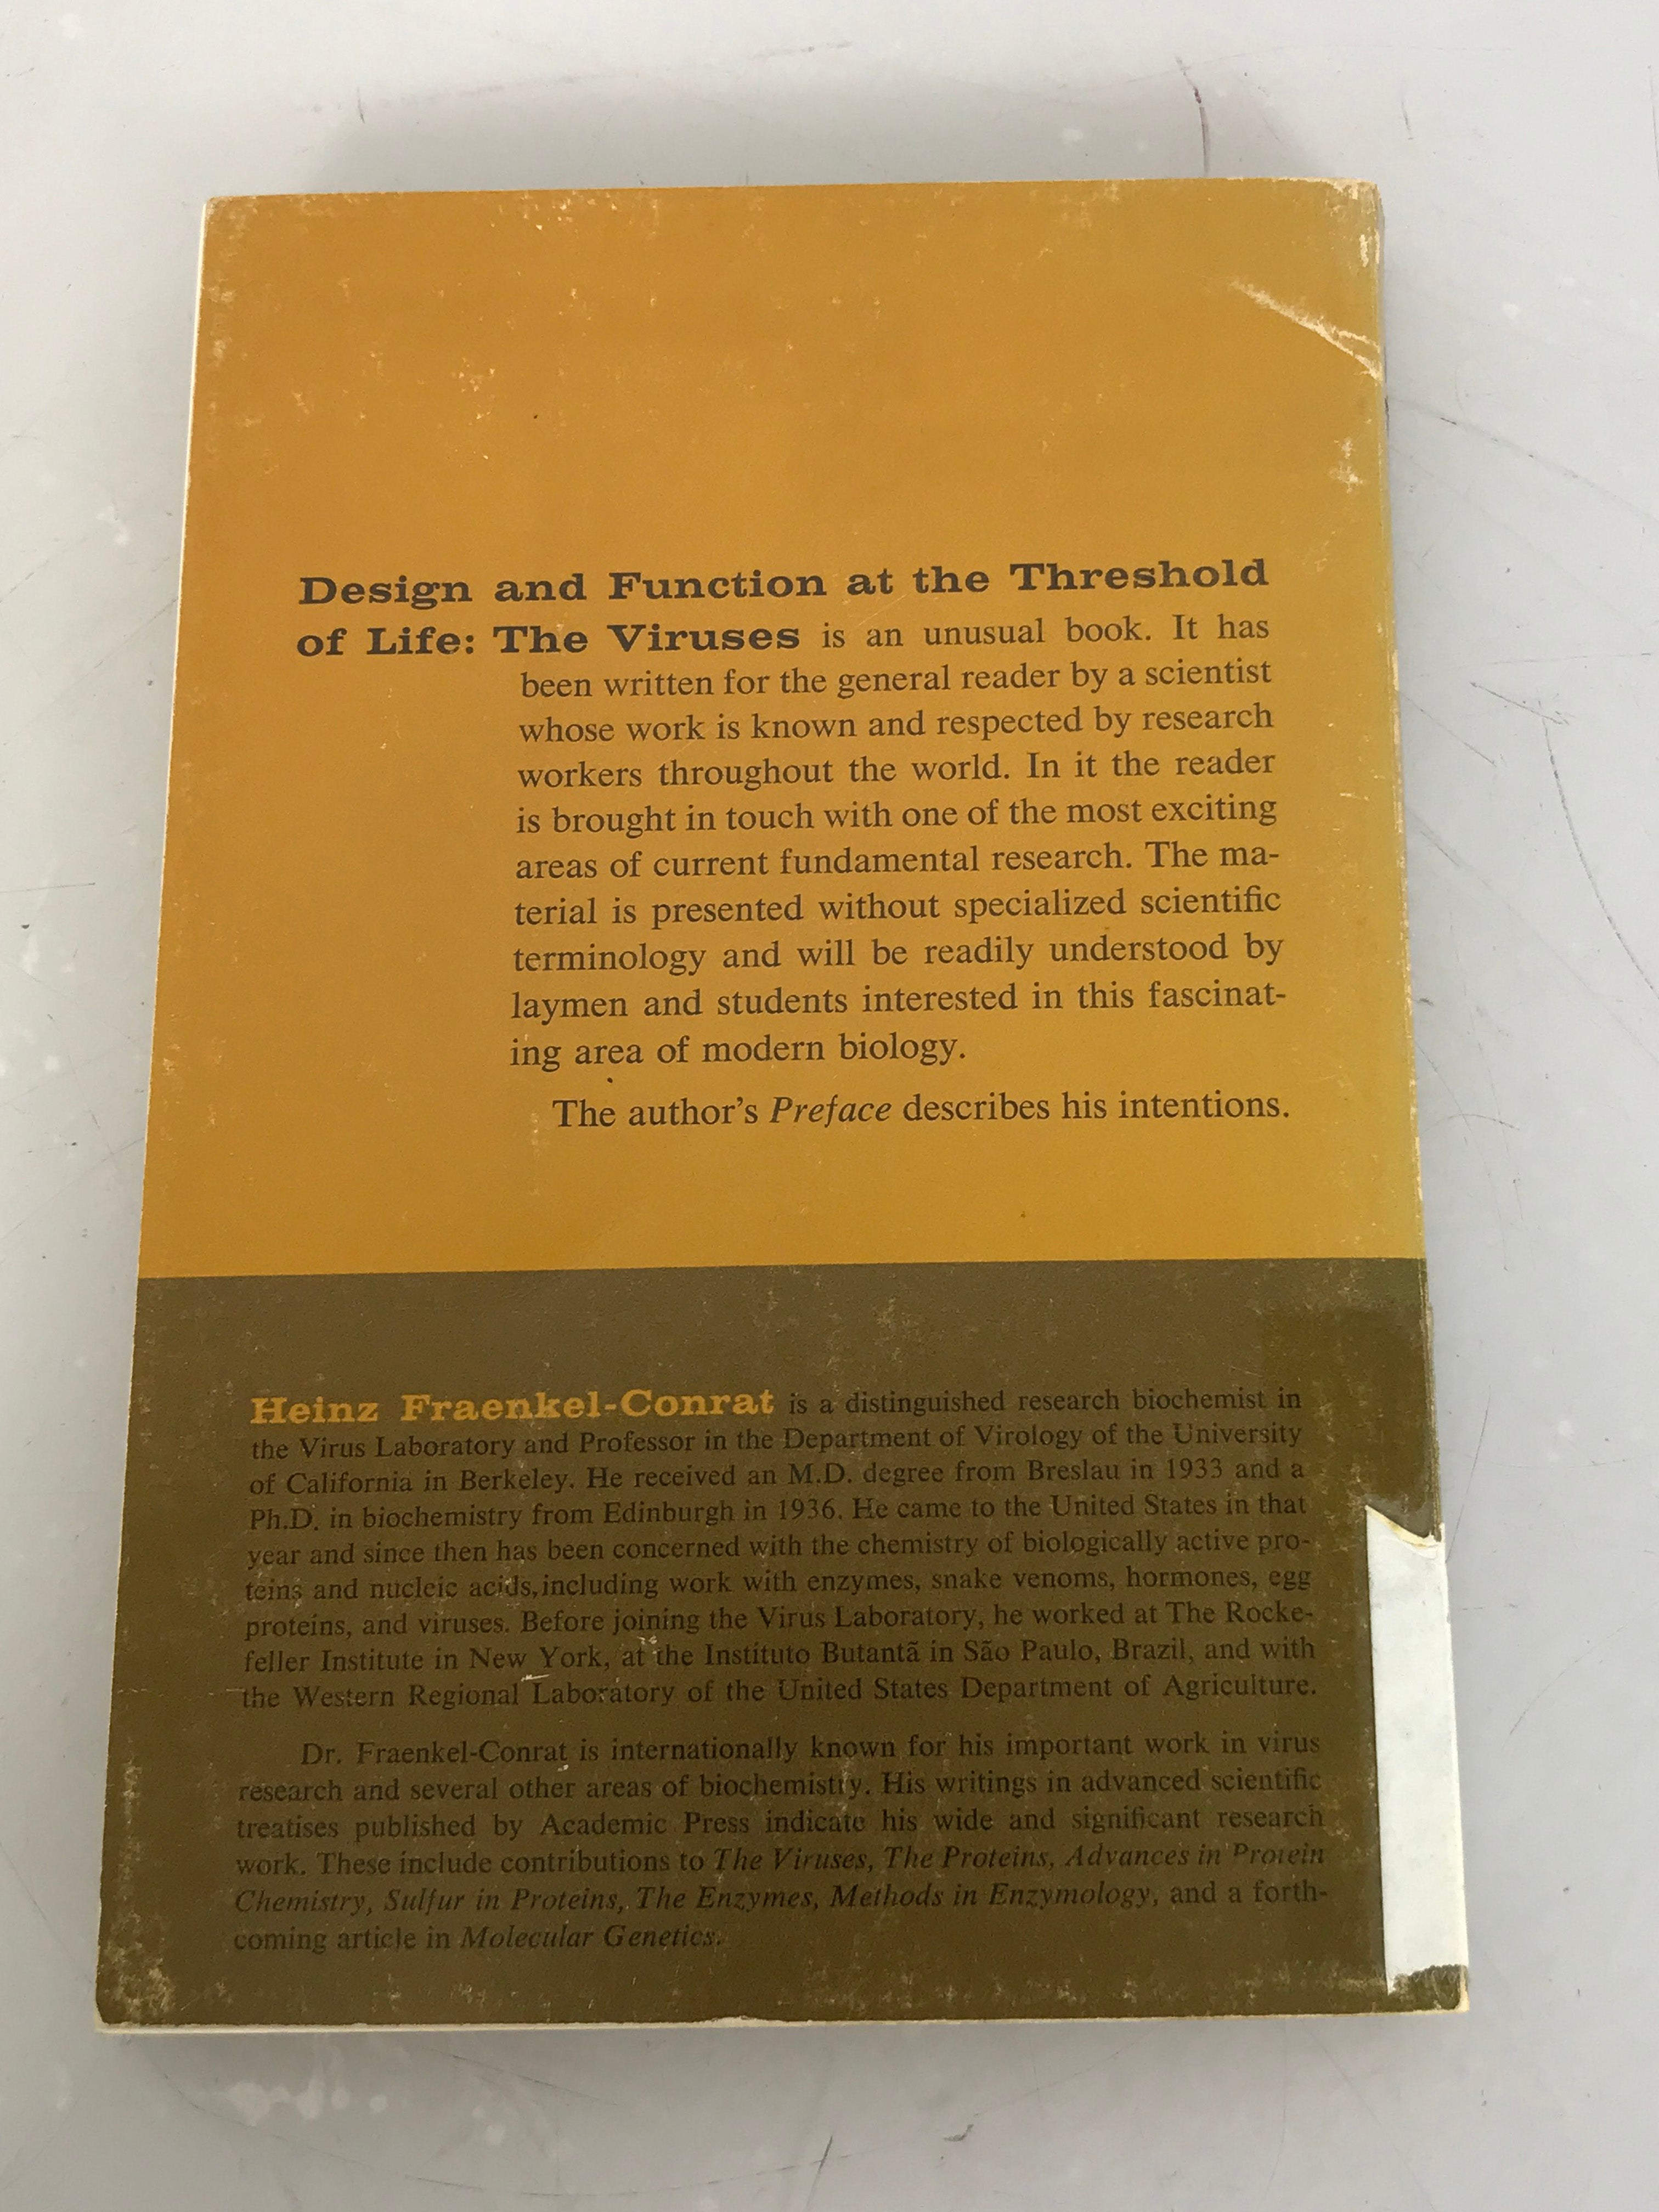 Design and Function at the Threshold of Life: The Viruses by Heinz Fraenkel-Conrat 1962 Academic Press SC